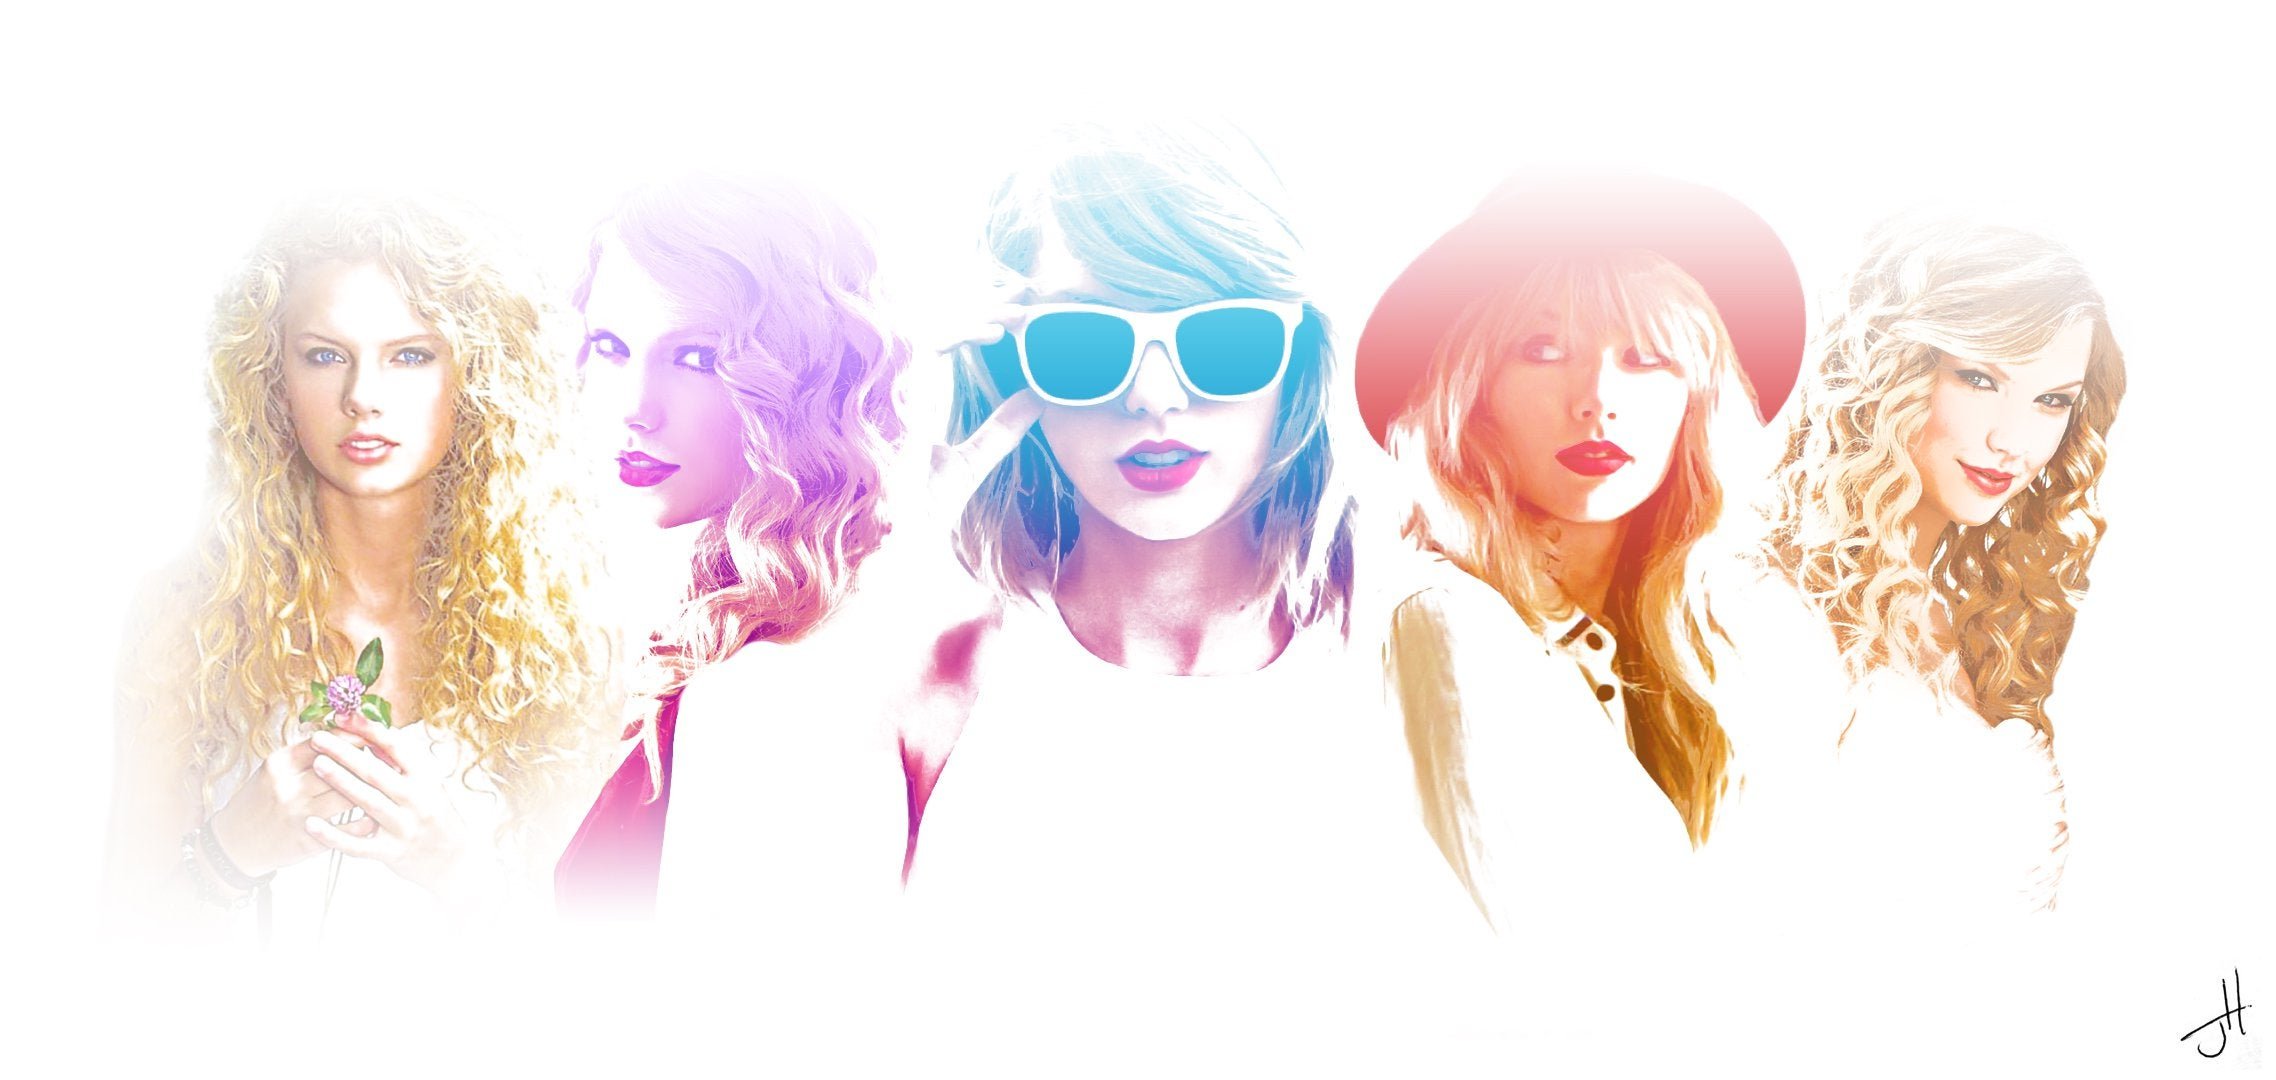 Graphic I made of Taylors